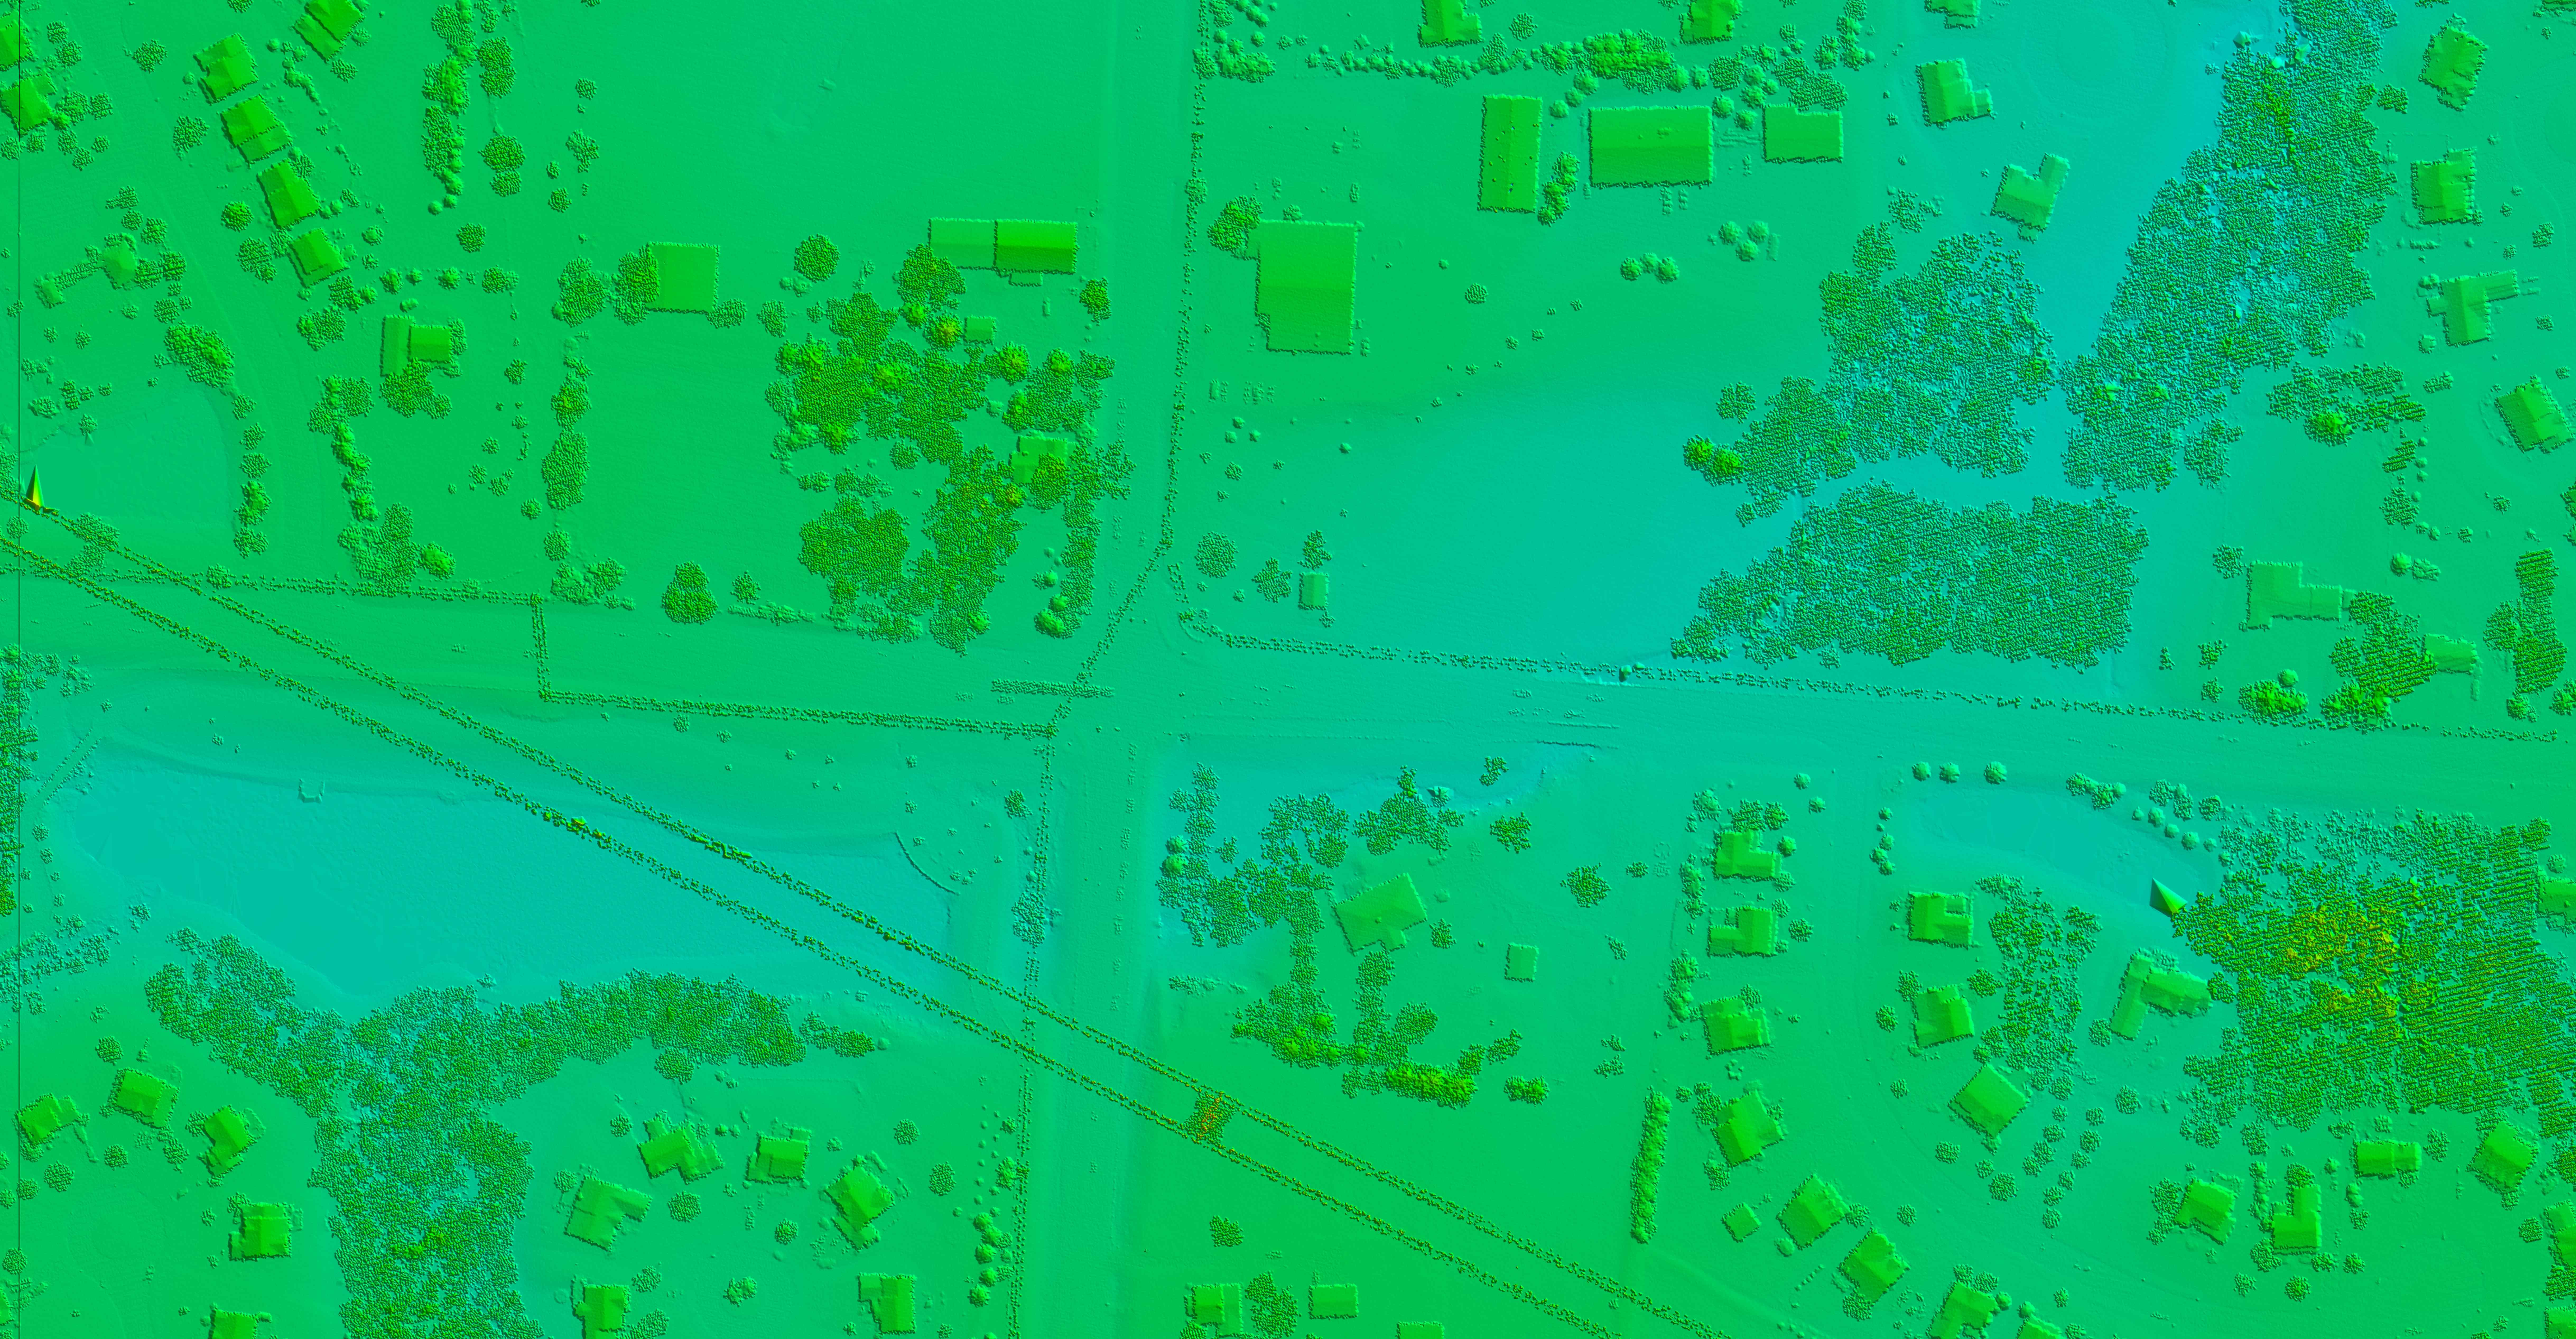 This image of South Old State Road shows how LiDAR uses datapoints to construct high-resolution maps. This digital surface model displays all surfaces captured by the LiDAR sensor.